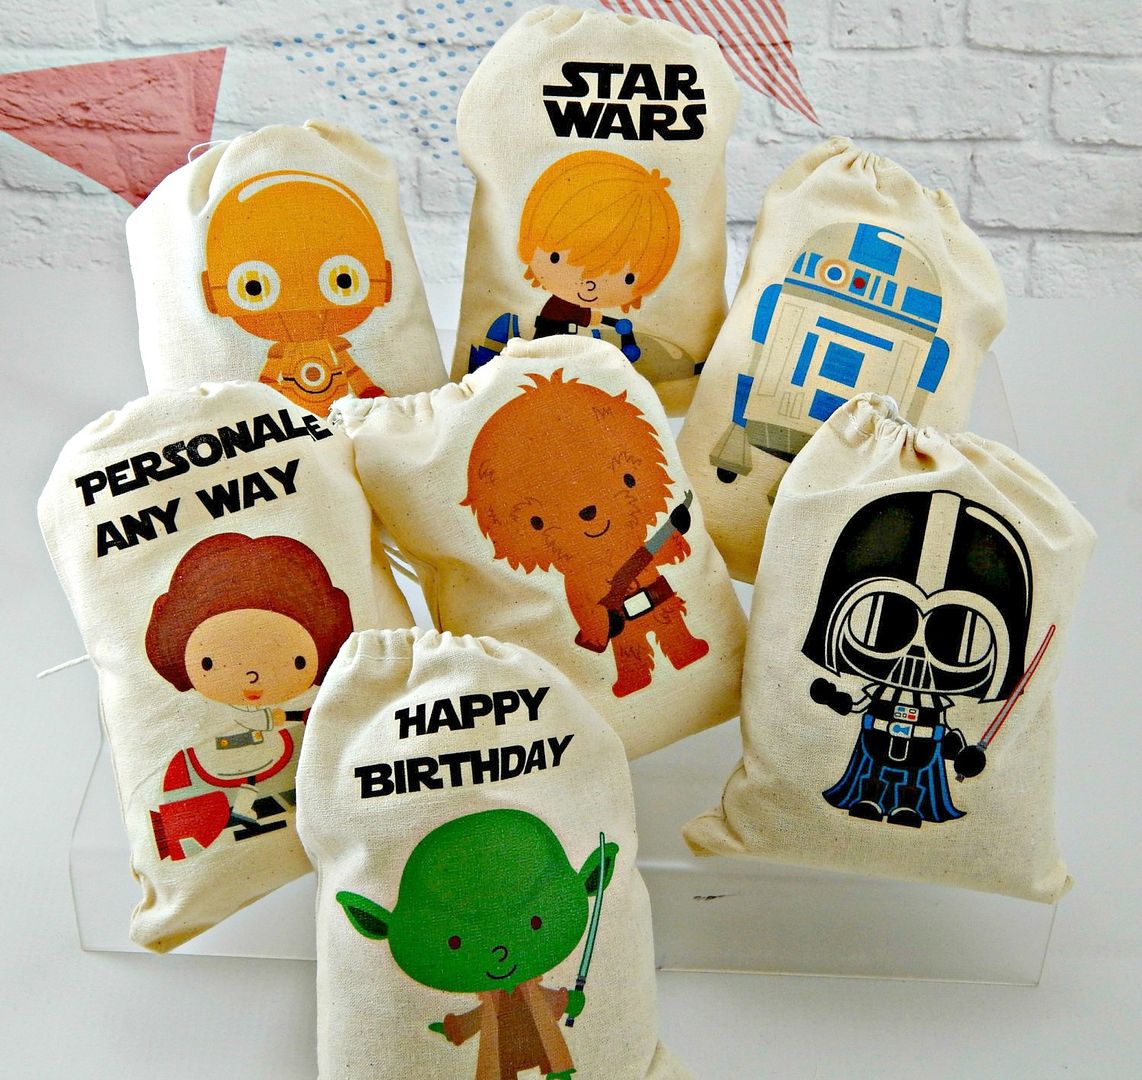 Star Wars favor bags personalized for birthday parties